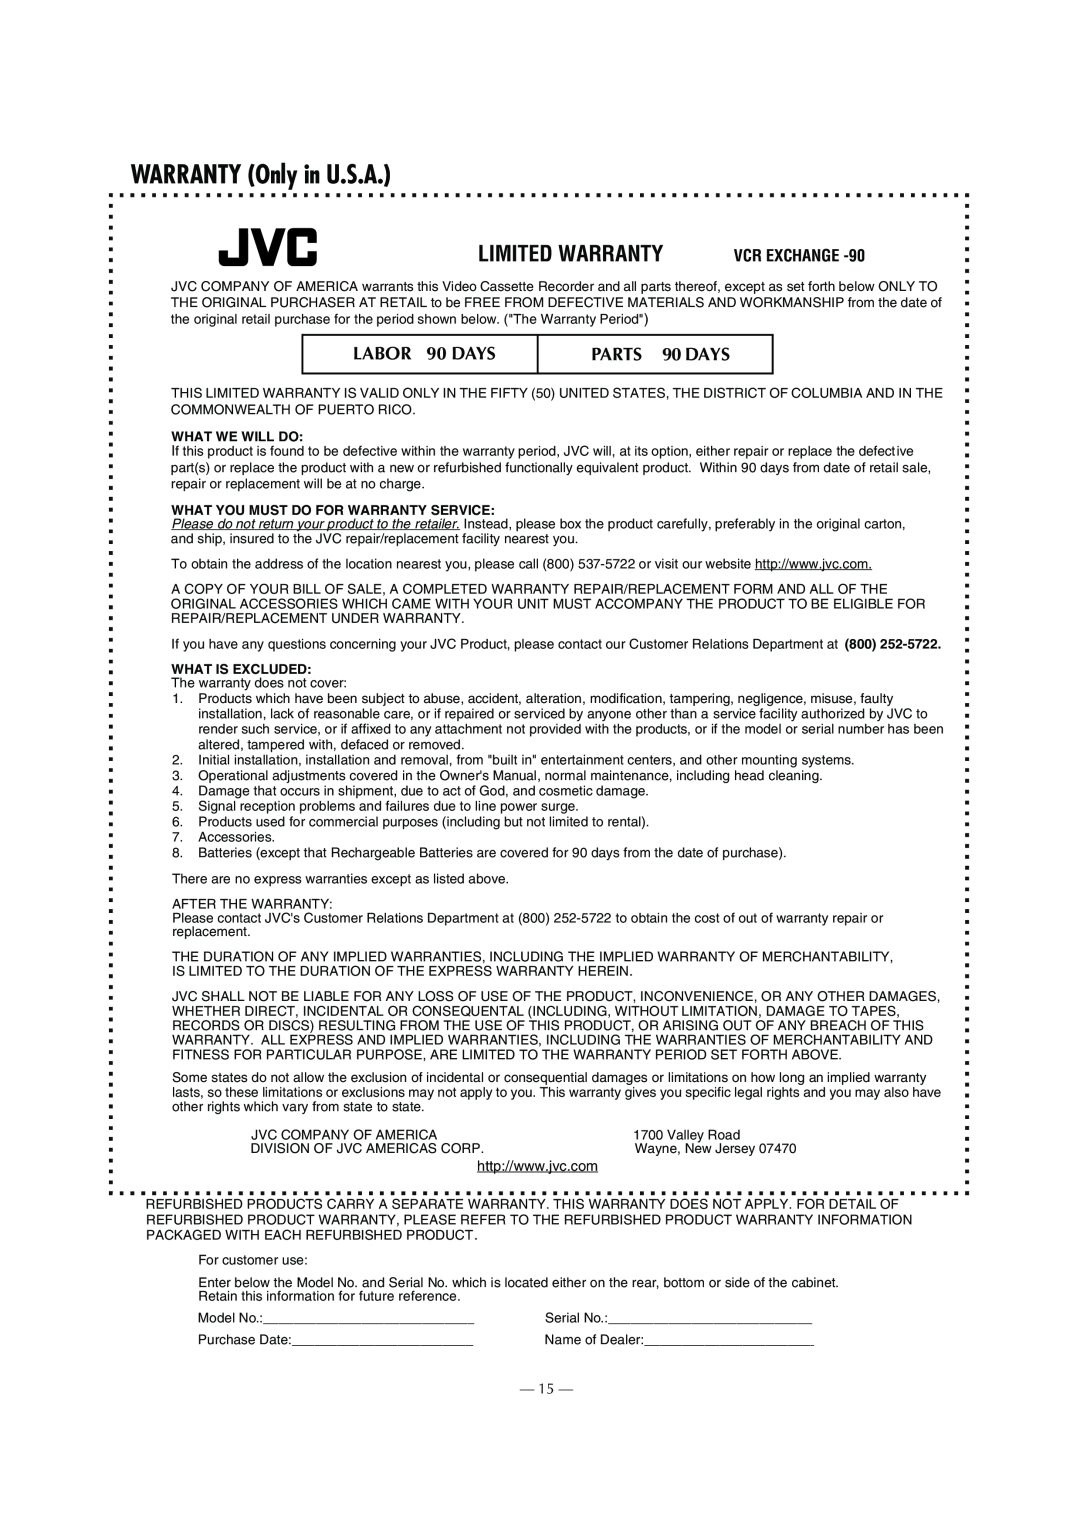 JVC HR-S2902U WARRANTY Only in U.S.A, LABOR 90 DAYS, PARTS 90 DAYS, Limited Warranty, What We Will Do, What Is Excluded 